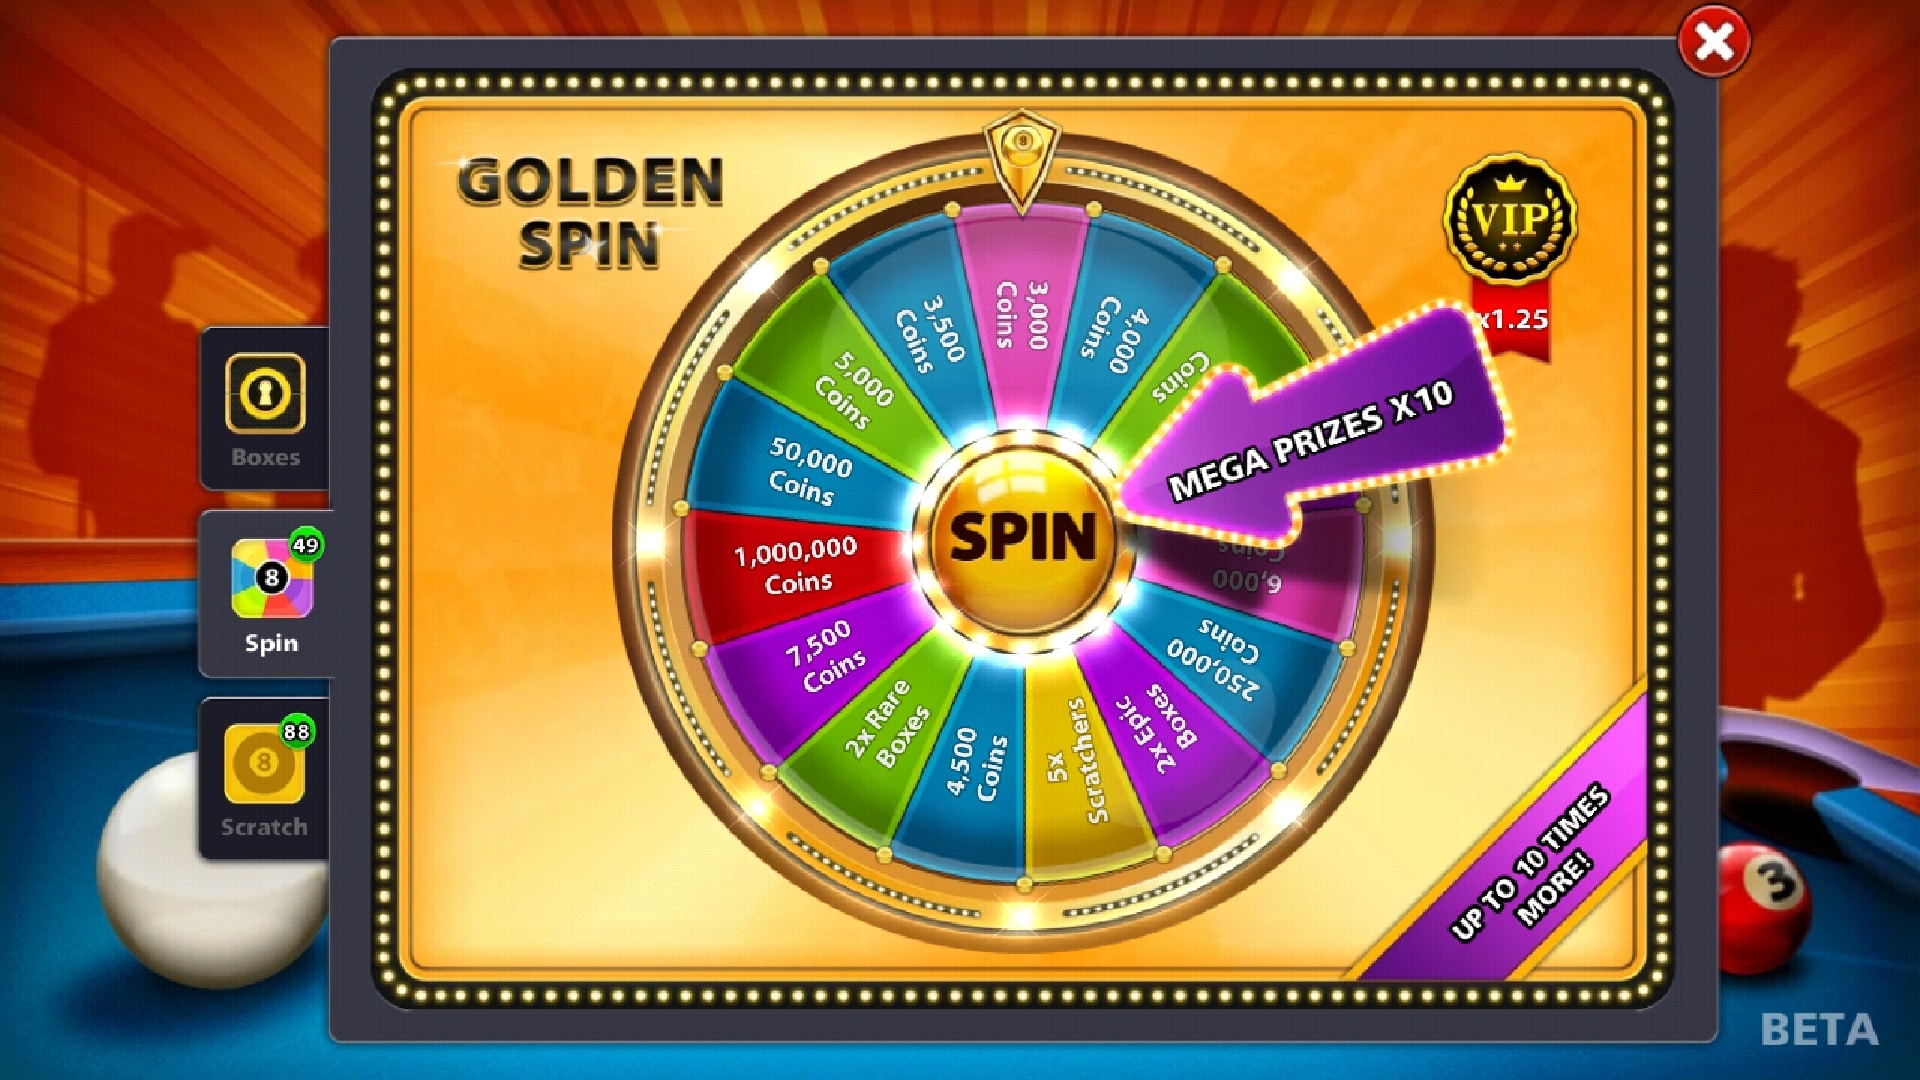 Spin and Gold 6 Max. Spinning Gold. Lux Ducks 8ball.